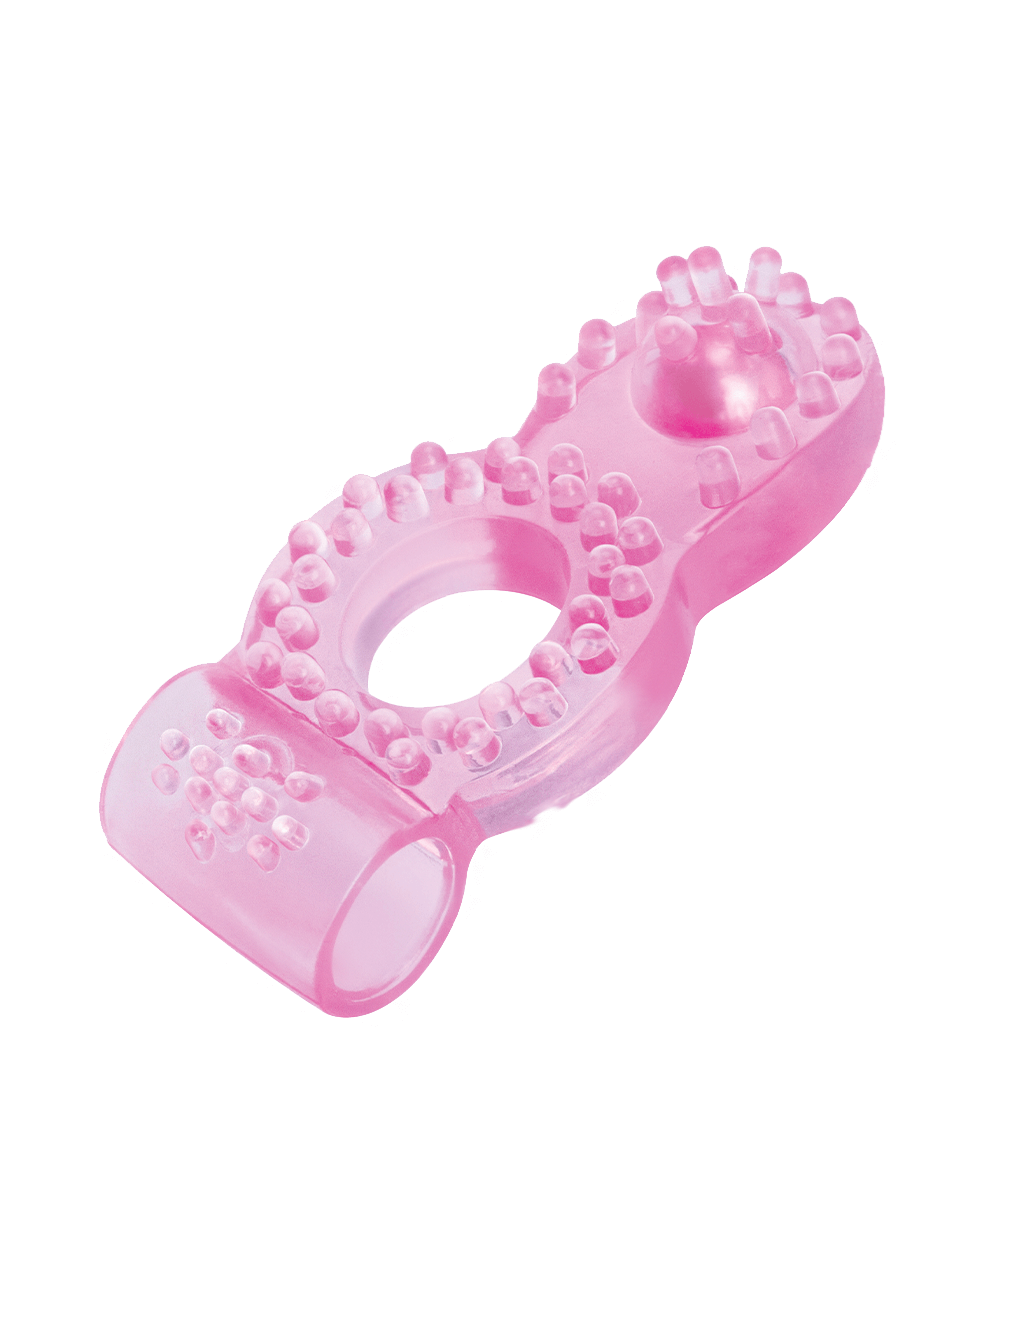 Bodywand Rechargeable Deluxe Orgasm Ring - Pink - No Bullet